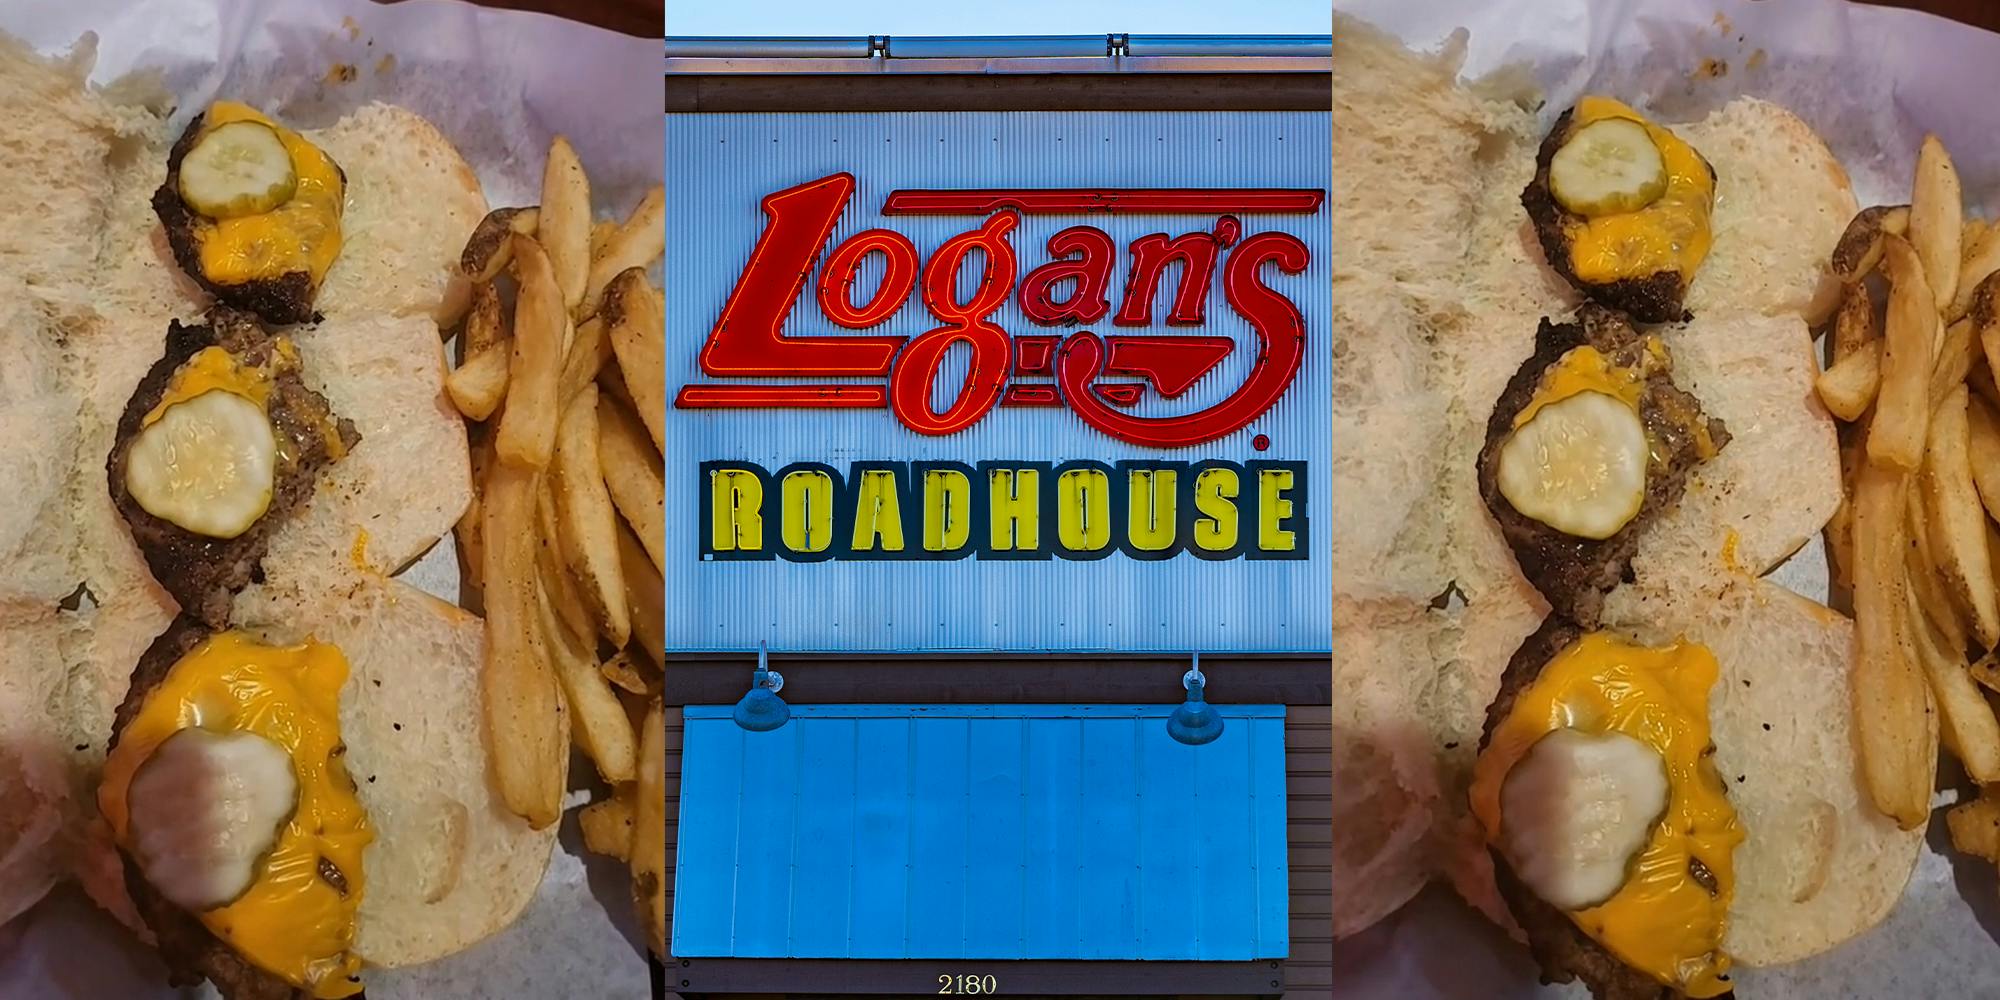 Logan’s Roadhouse customer opens burger buns up, finds all the patties cut in half